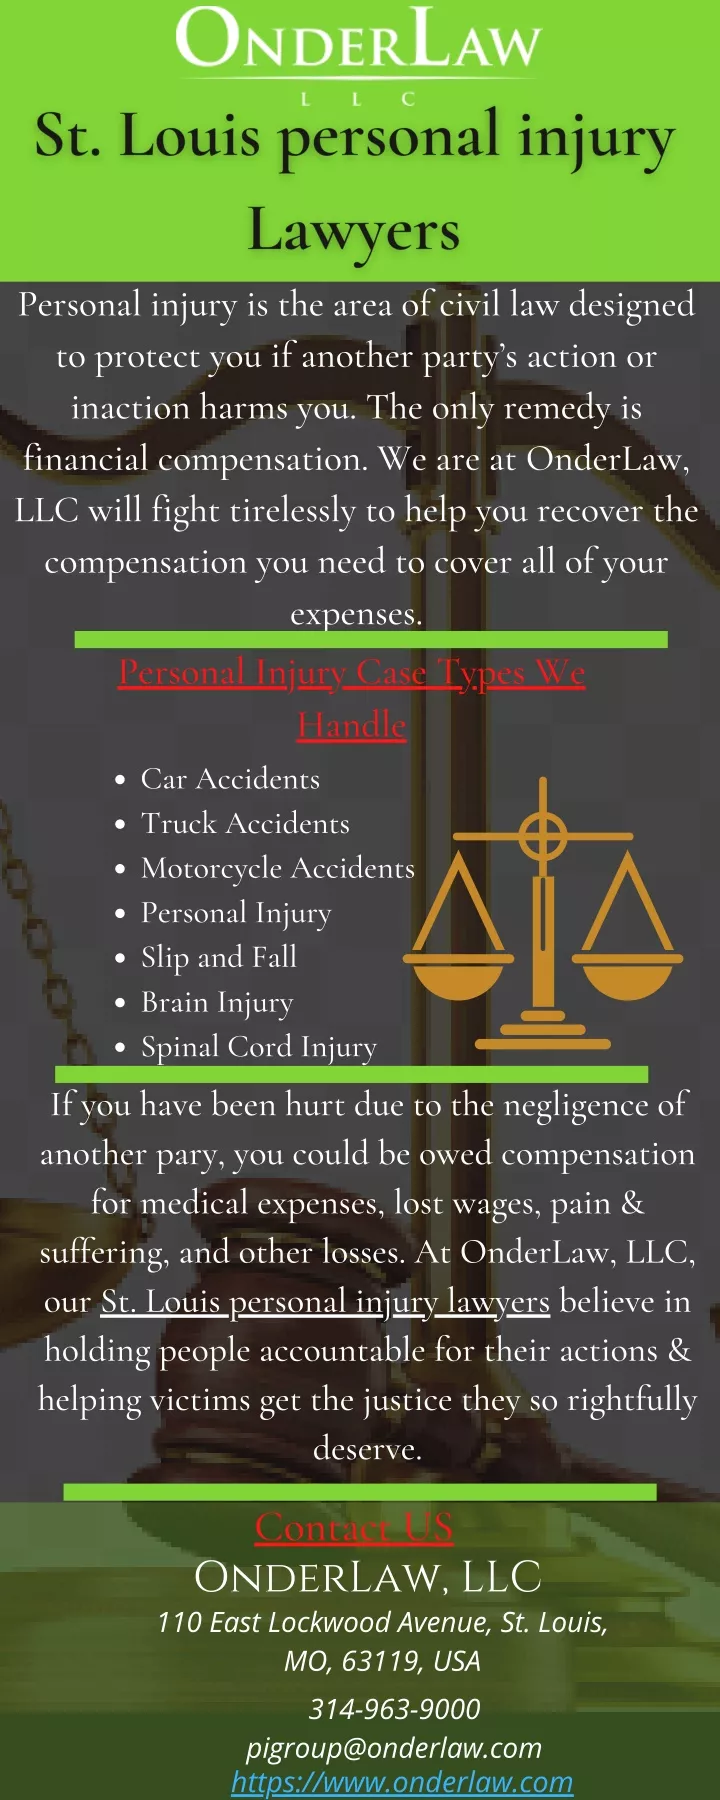 personal injury is the area of civil law designed